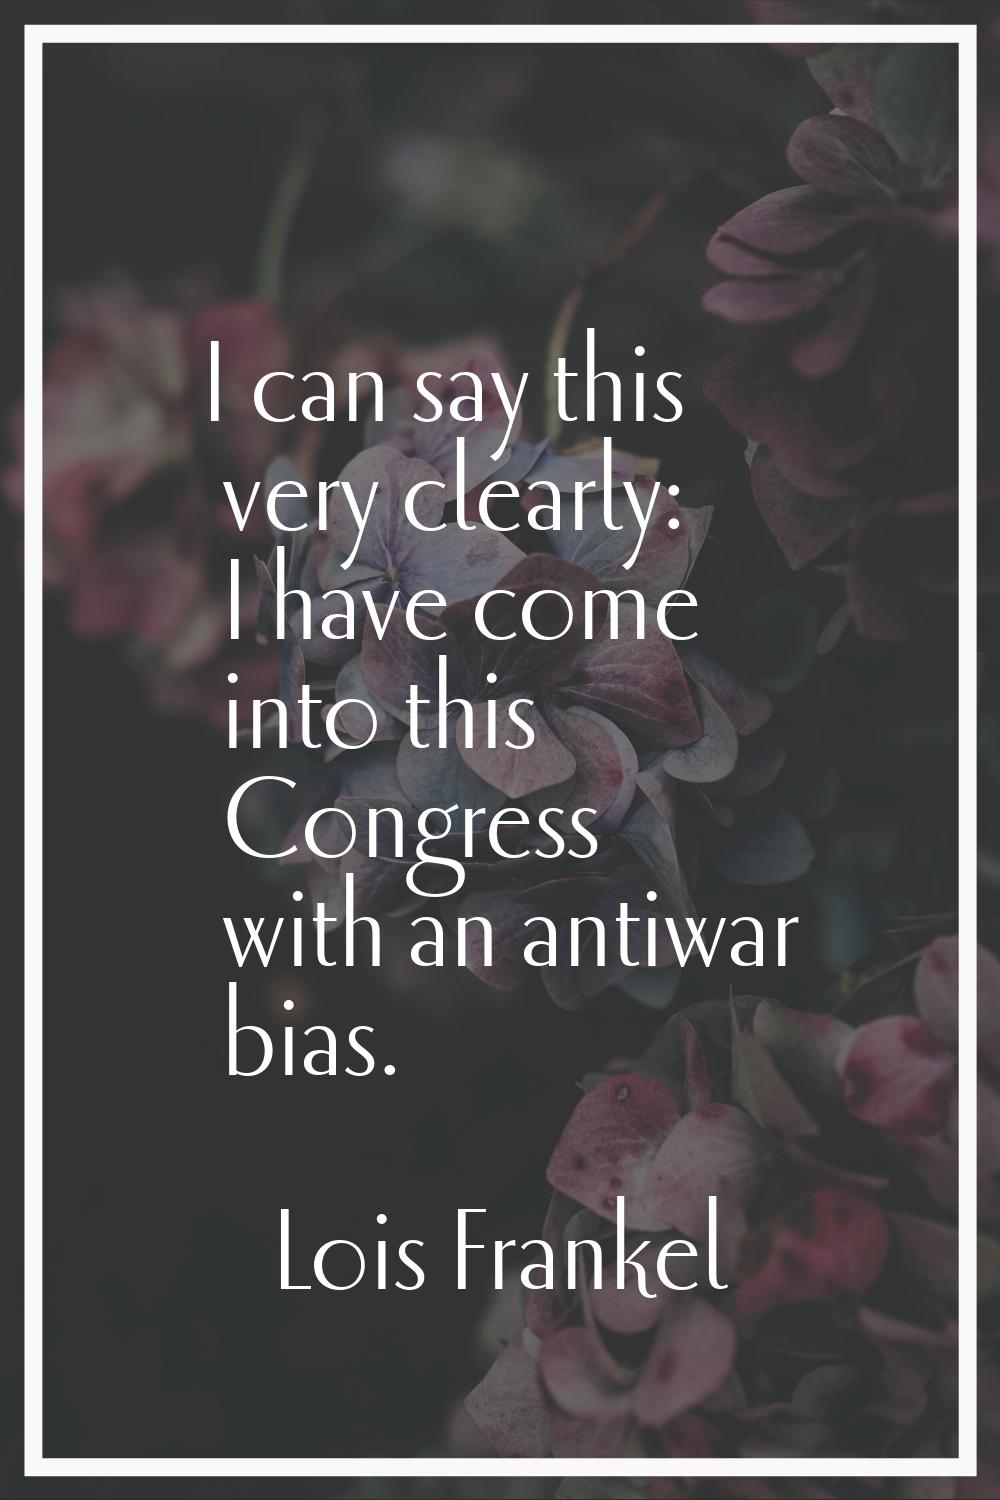 I can say this very clearly: I have come into this Congress with an antiwar bias.